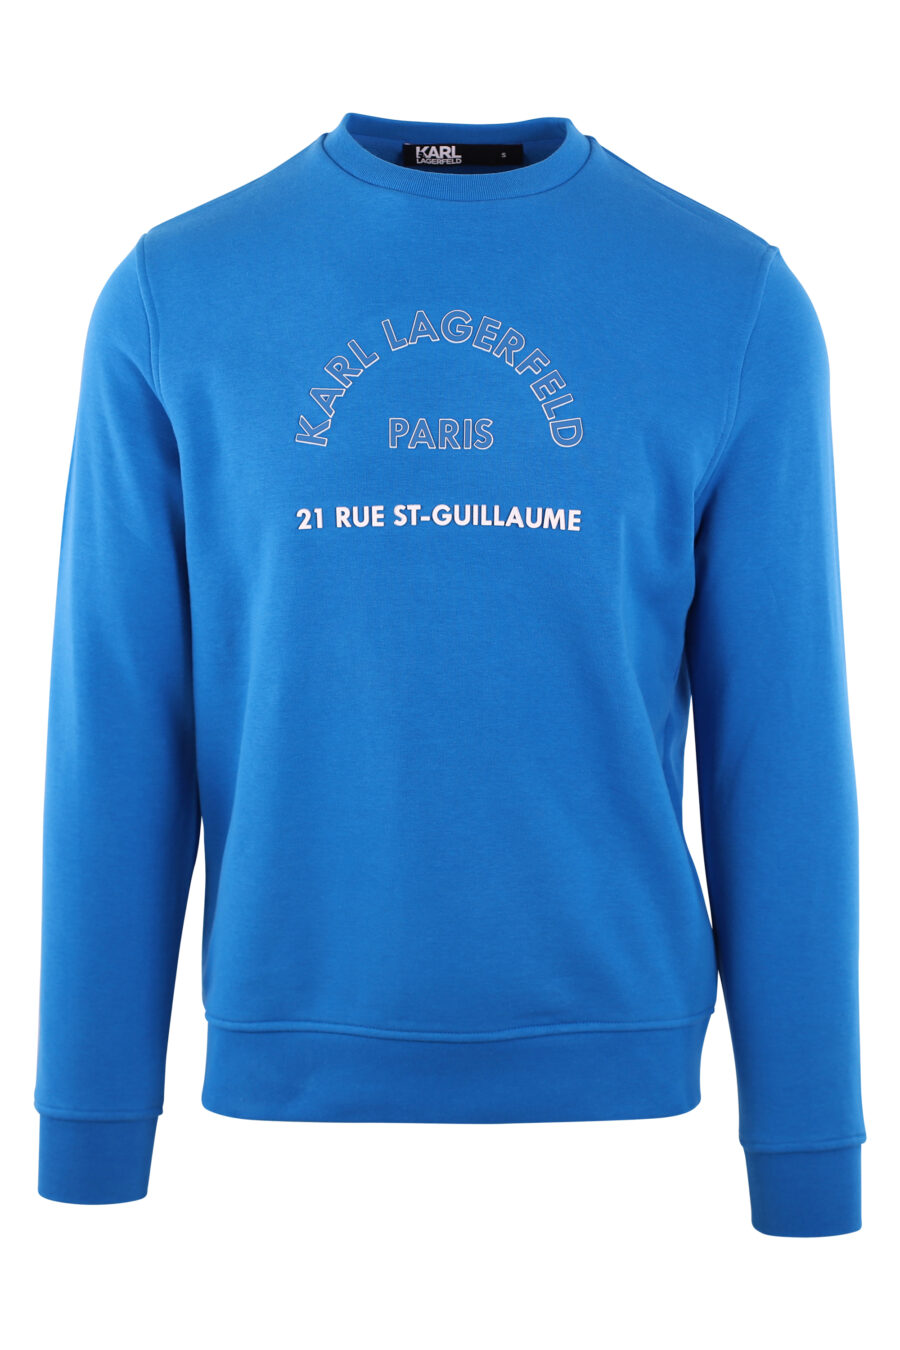 Blue sweatshirt with "rue st-guillaume" logo - IMG 2840